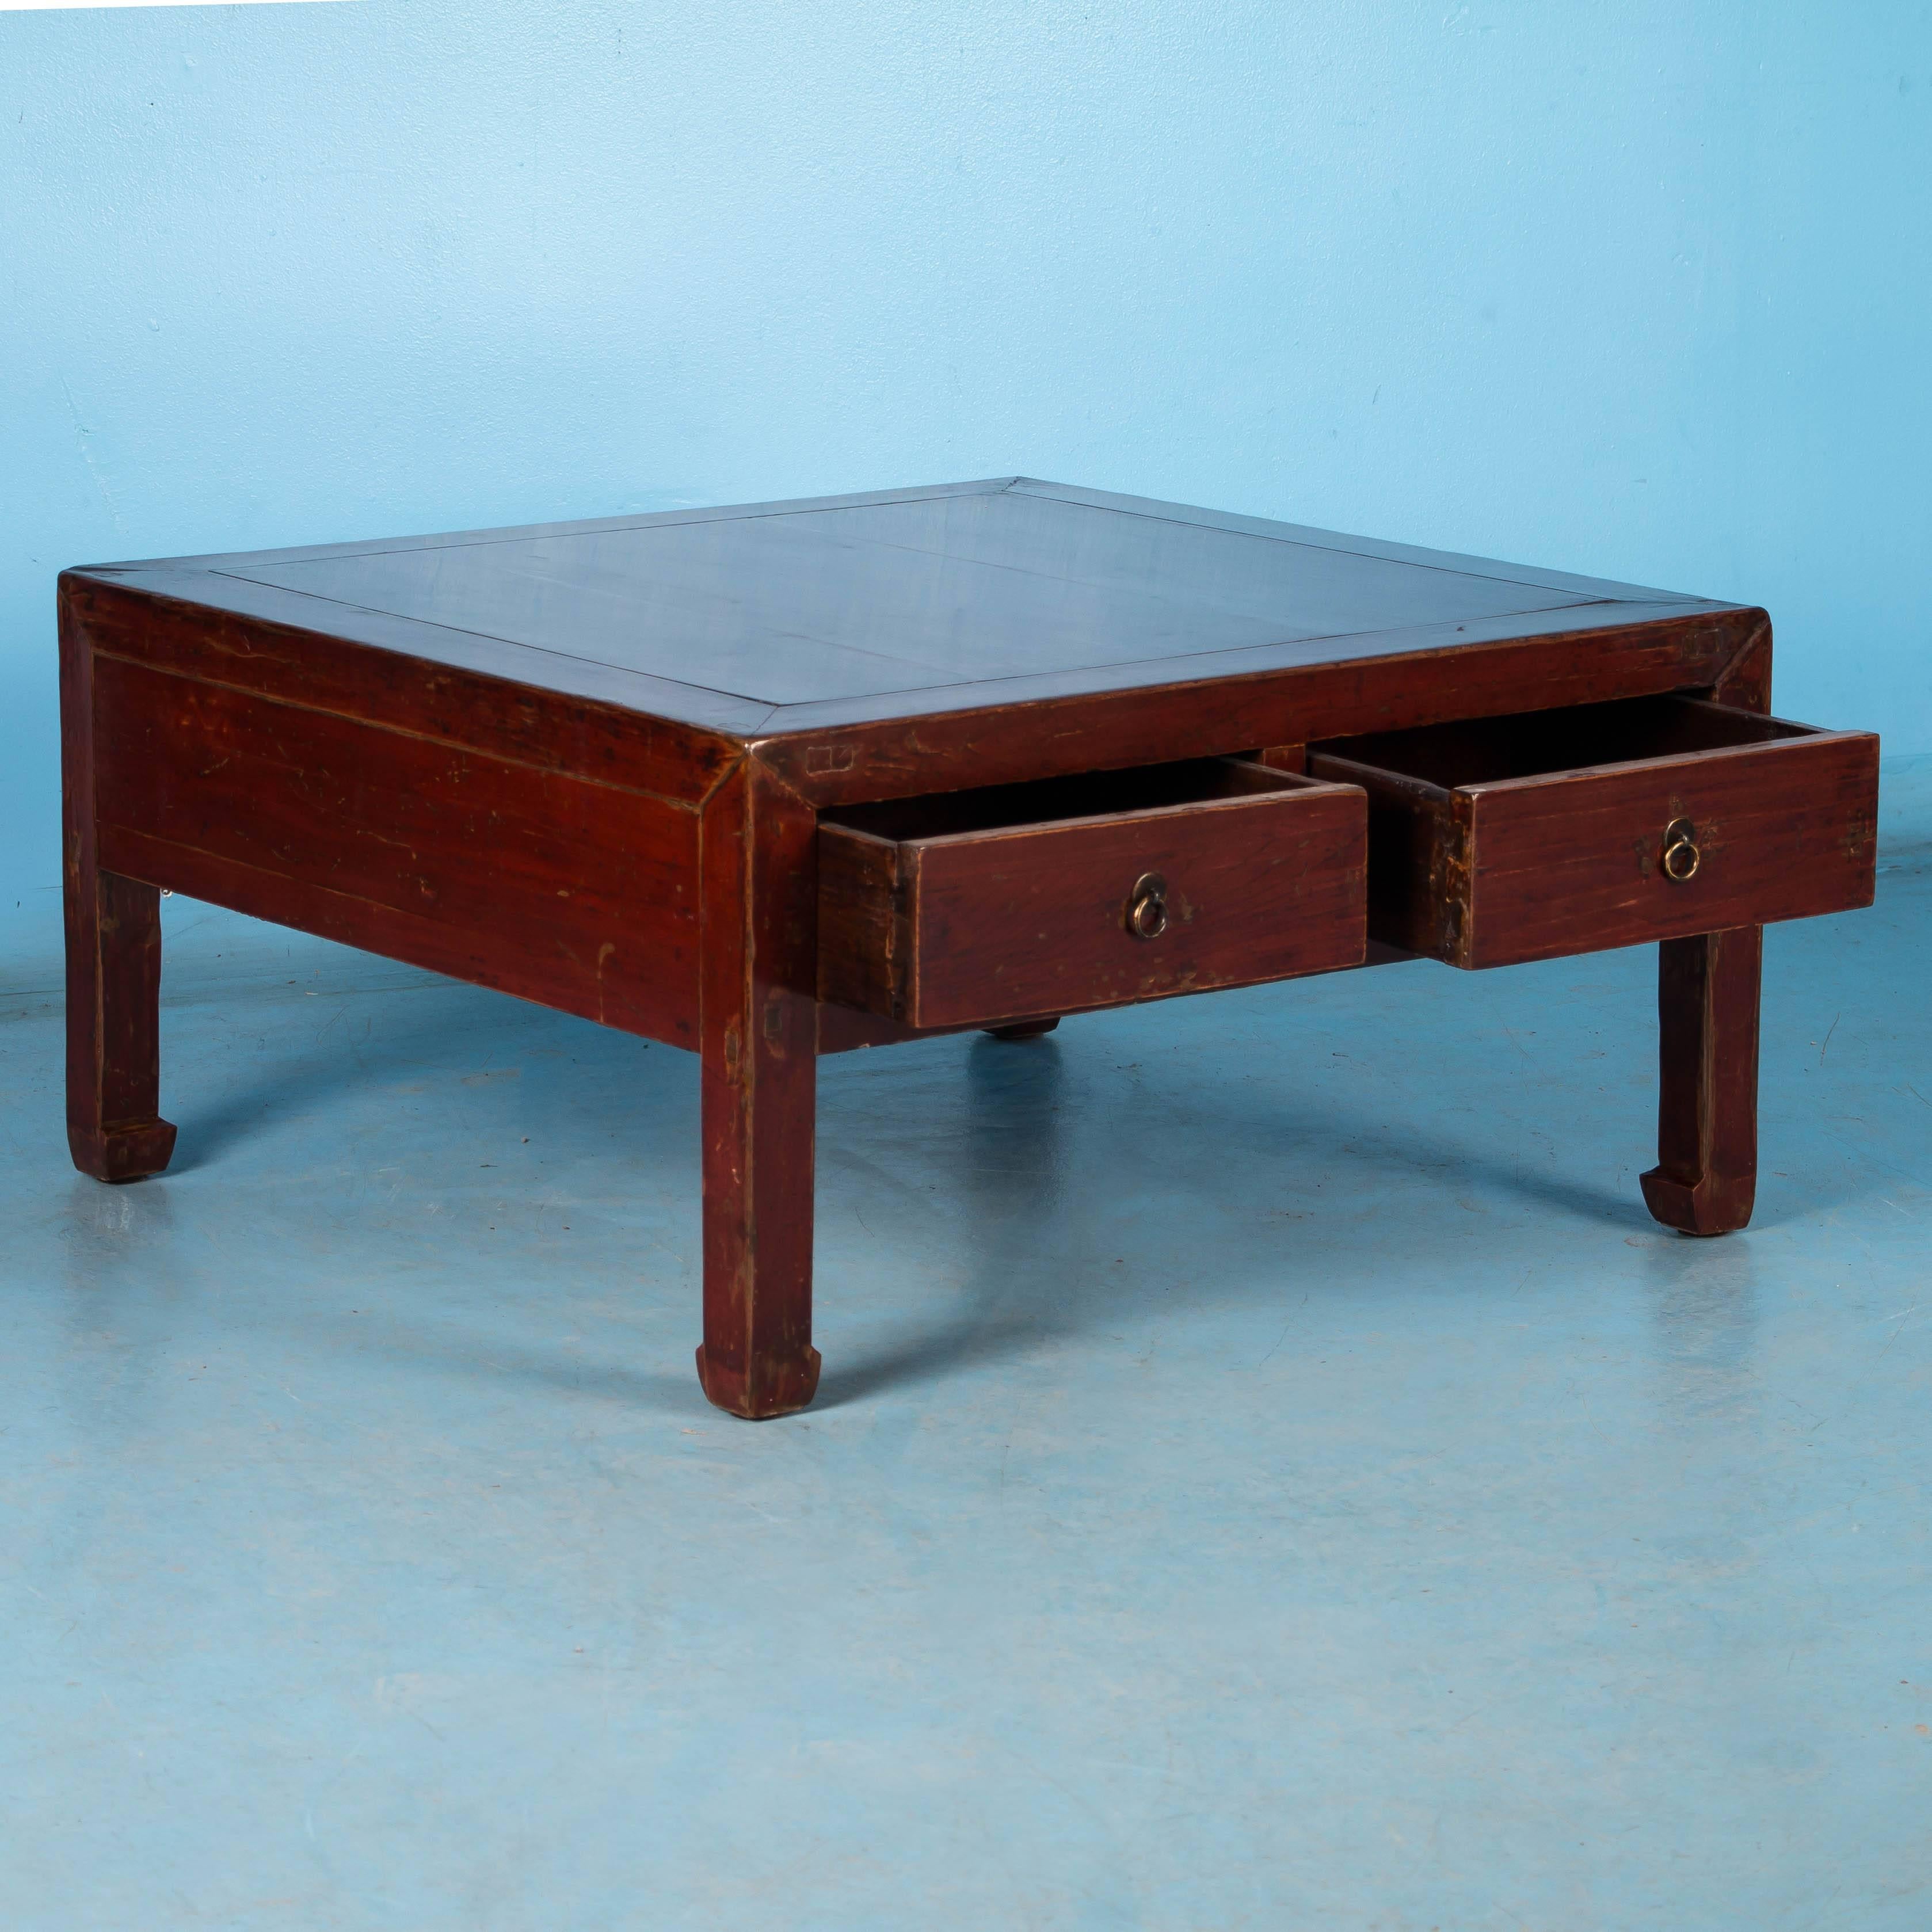 This square Chinese red lacquered coffee table, with it's simple, clean lines is made of elm and features a hard lacquer finish. The highly polished finish enhances the deep color which contrasts beautifully with the natural wood underneath where